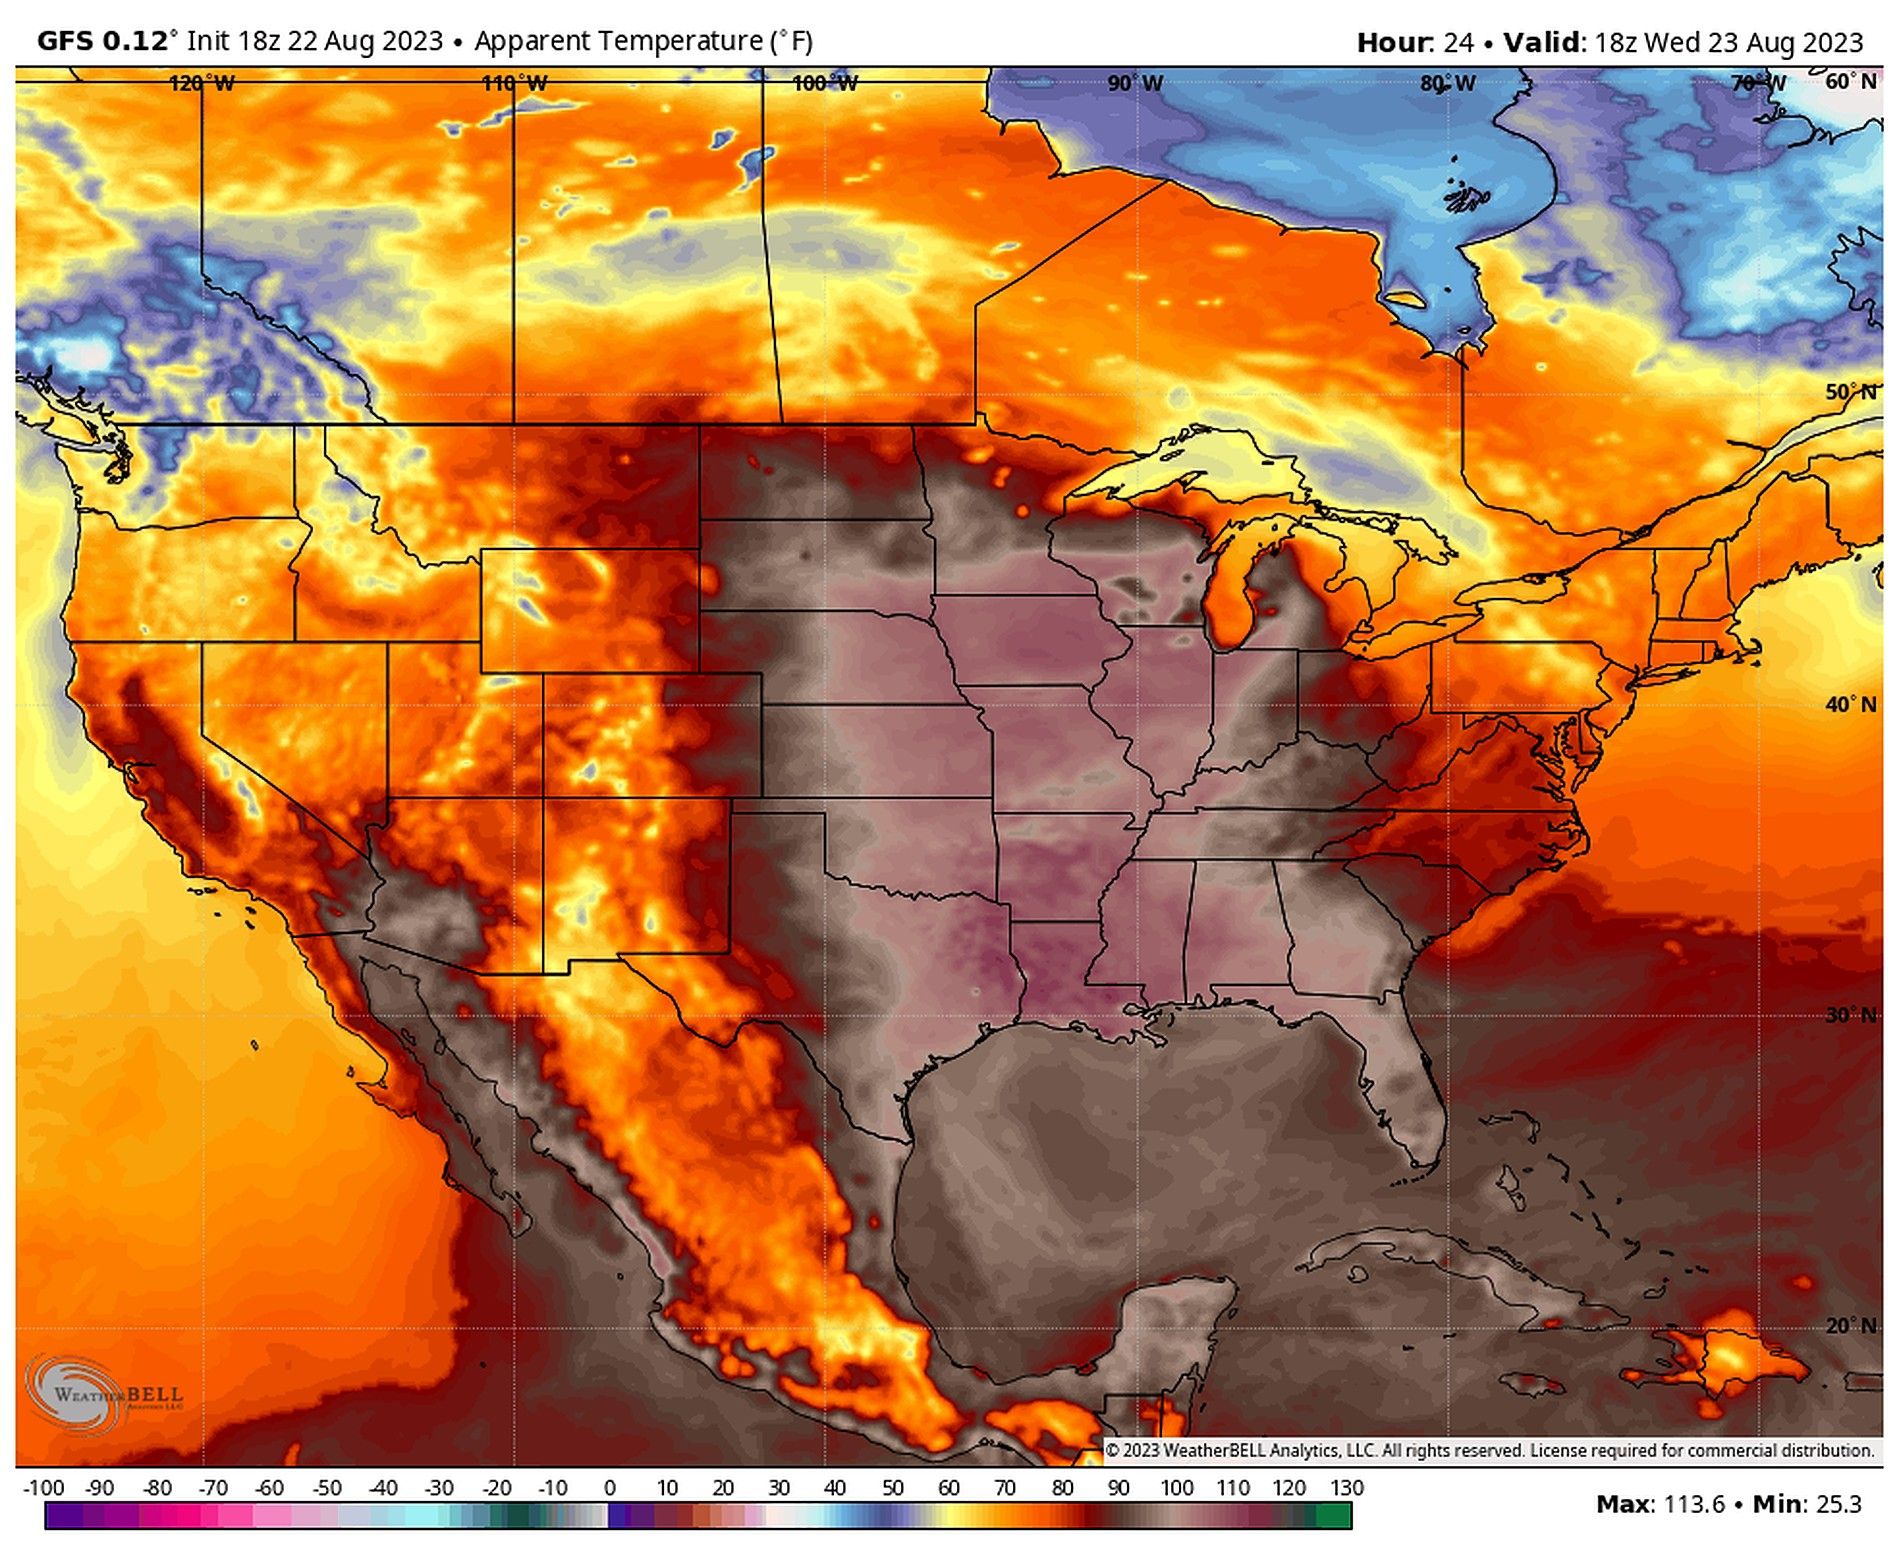 A heat map showing the hottest parts of the U.S. getting redder as it gets hotter, with the reddest parts over Central, Midwestern and Southern U.S. regions.